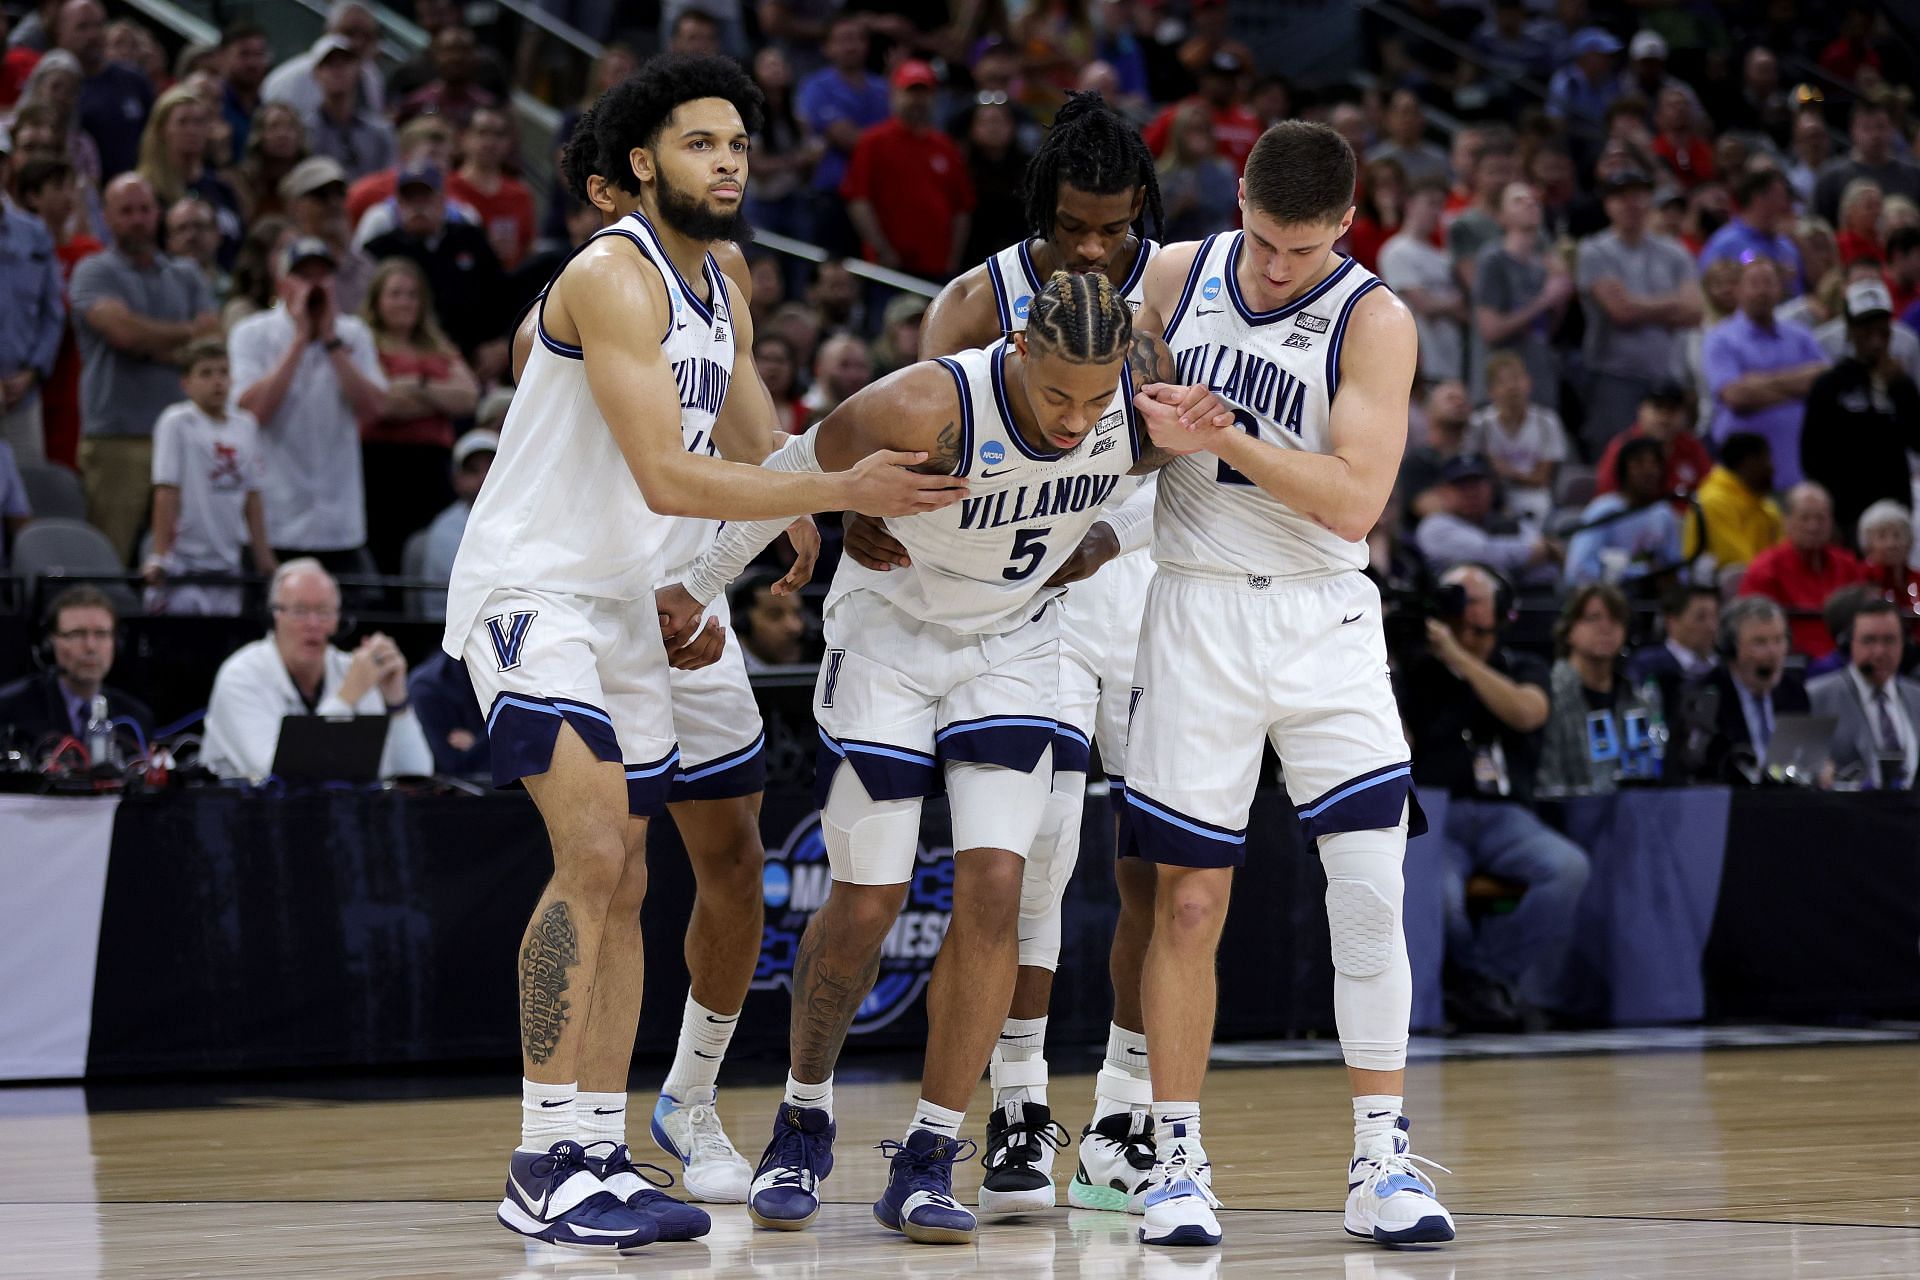 Justin Moore receives help from his Villanova teammates after a severe injury.